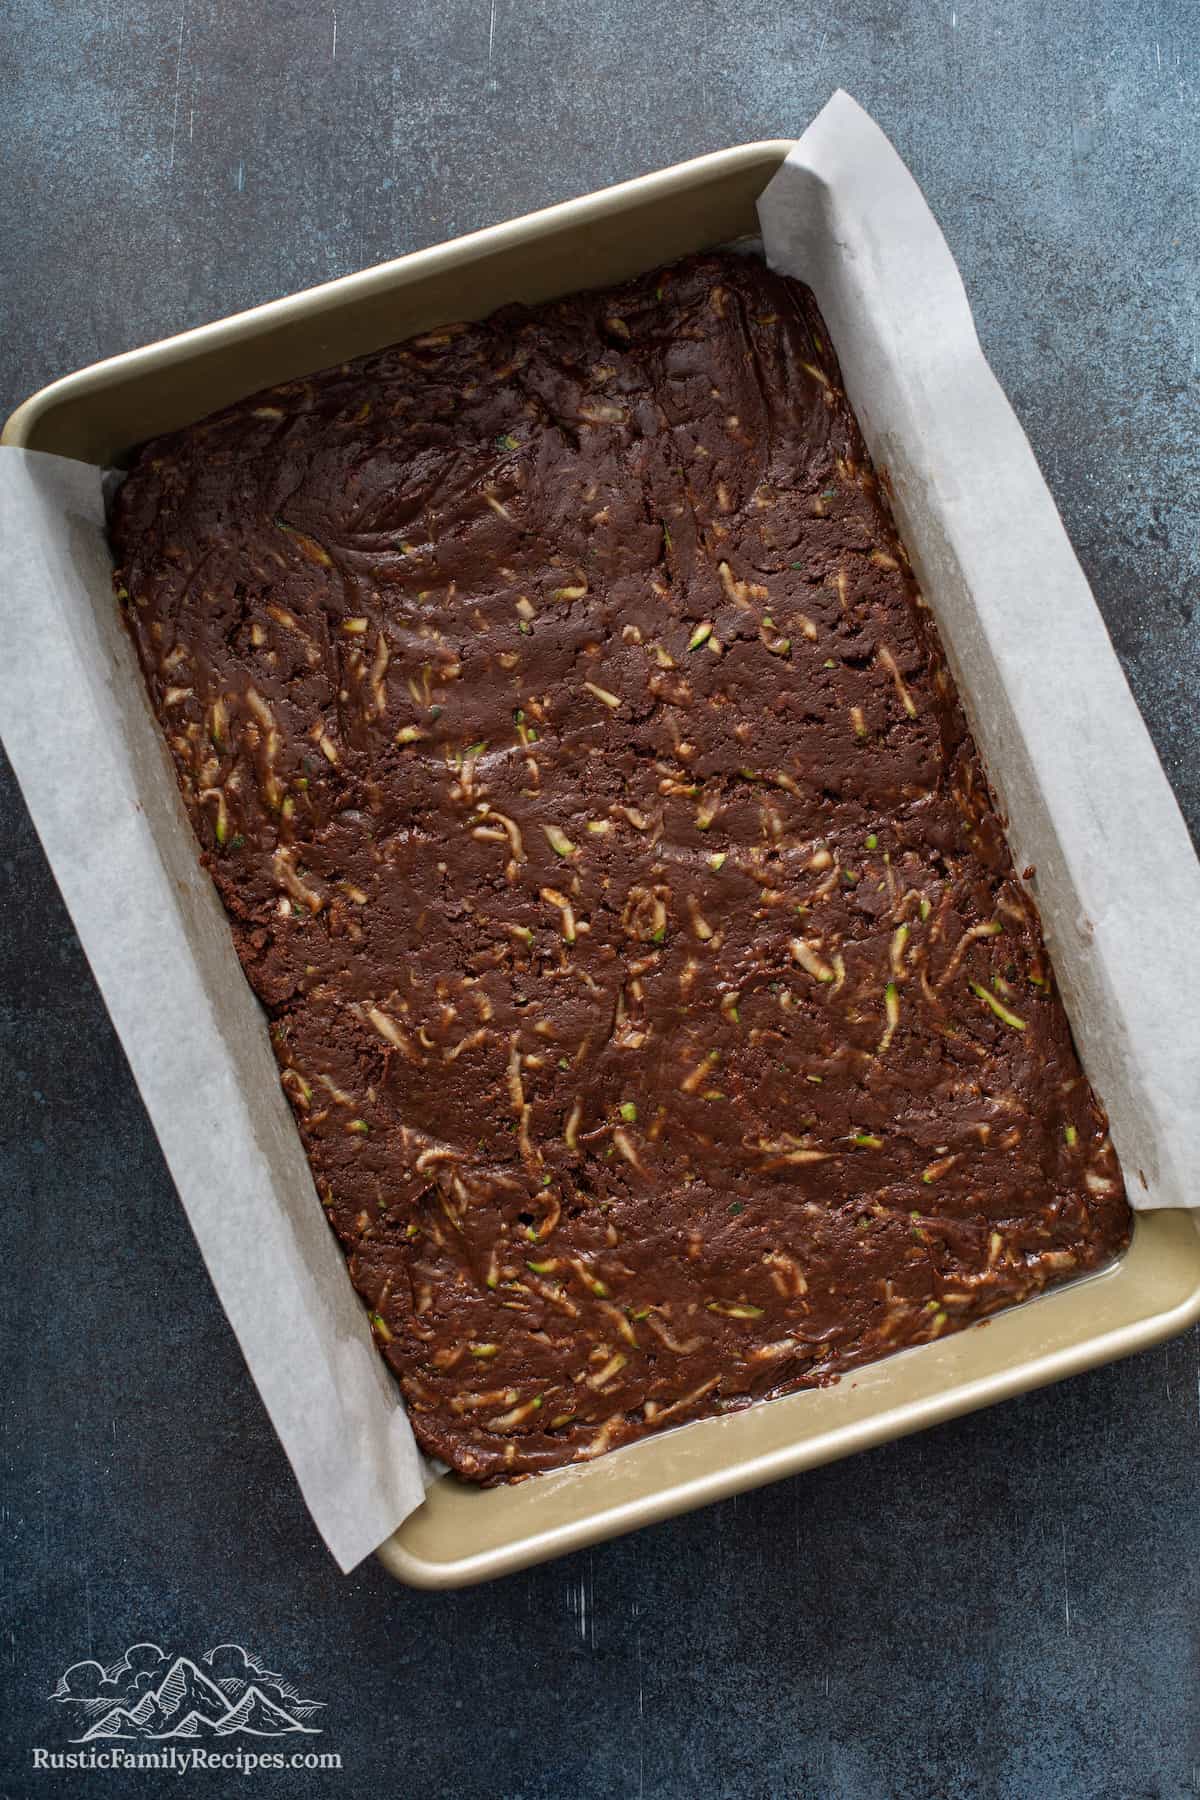 Unbaked zucchini brownie batter in a pan